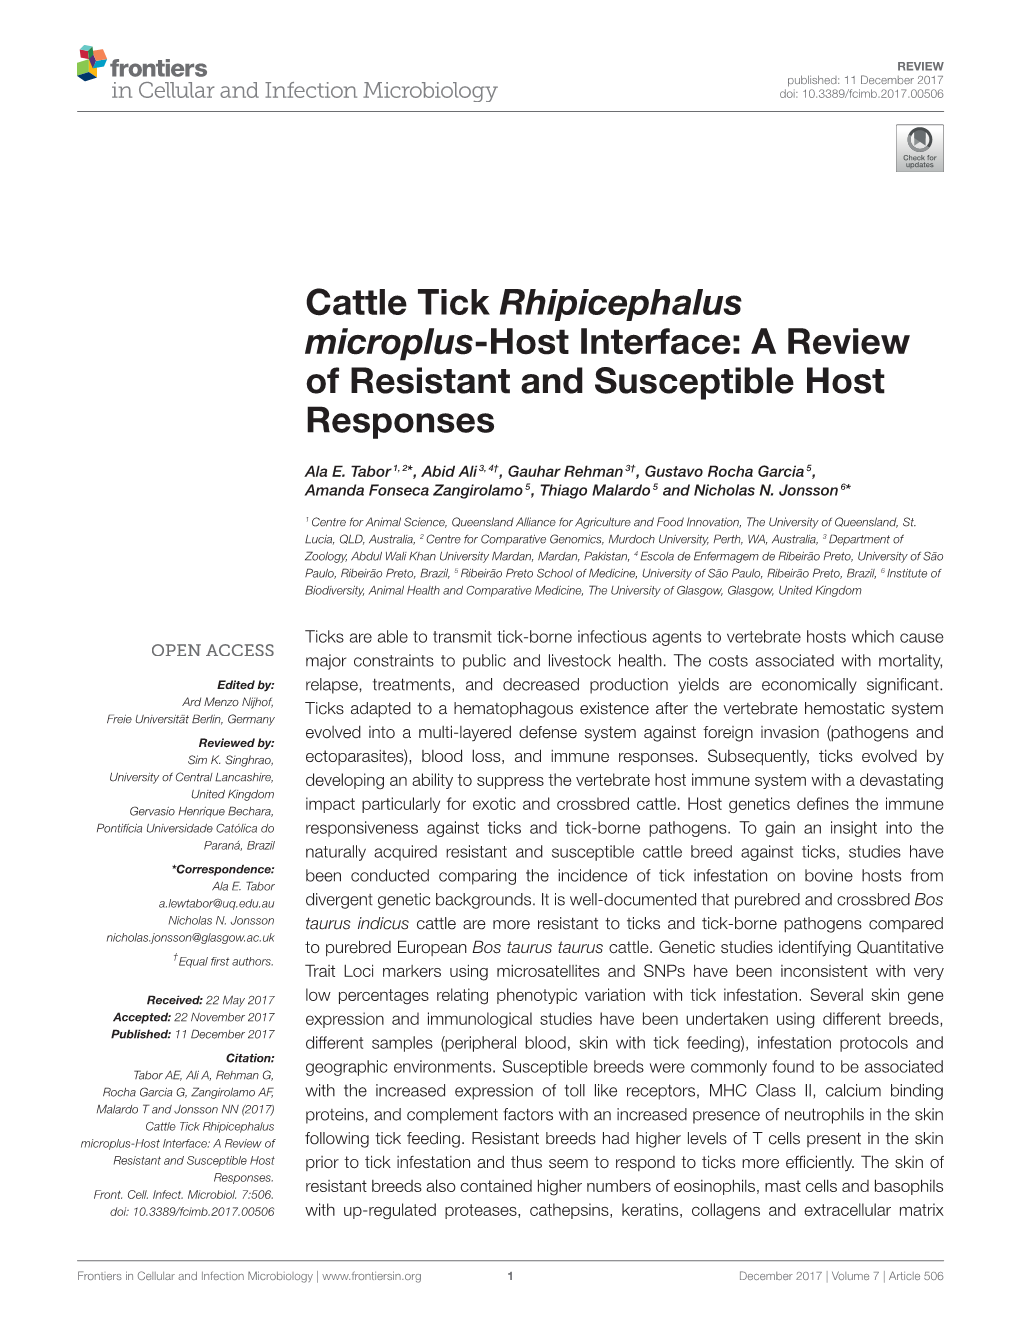 Cattle Tick Rhipicephalus Microplus-Host Interface: a Review of Resistant and Susceptible Host Responses